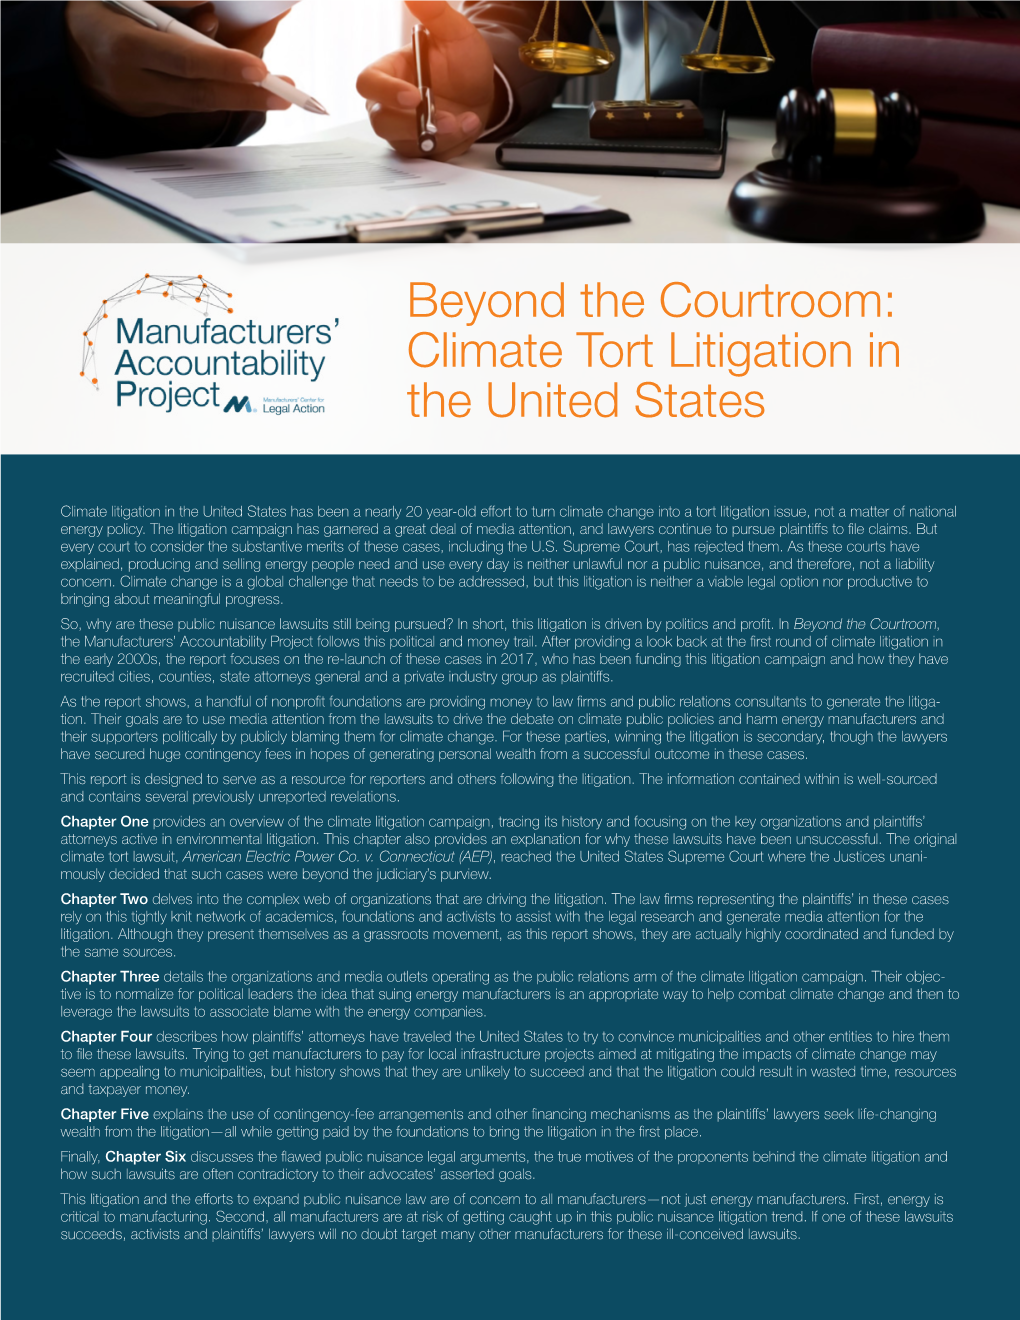 Beyond the Courtroom: Climate Tort Litigation in the United States